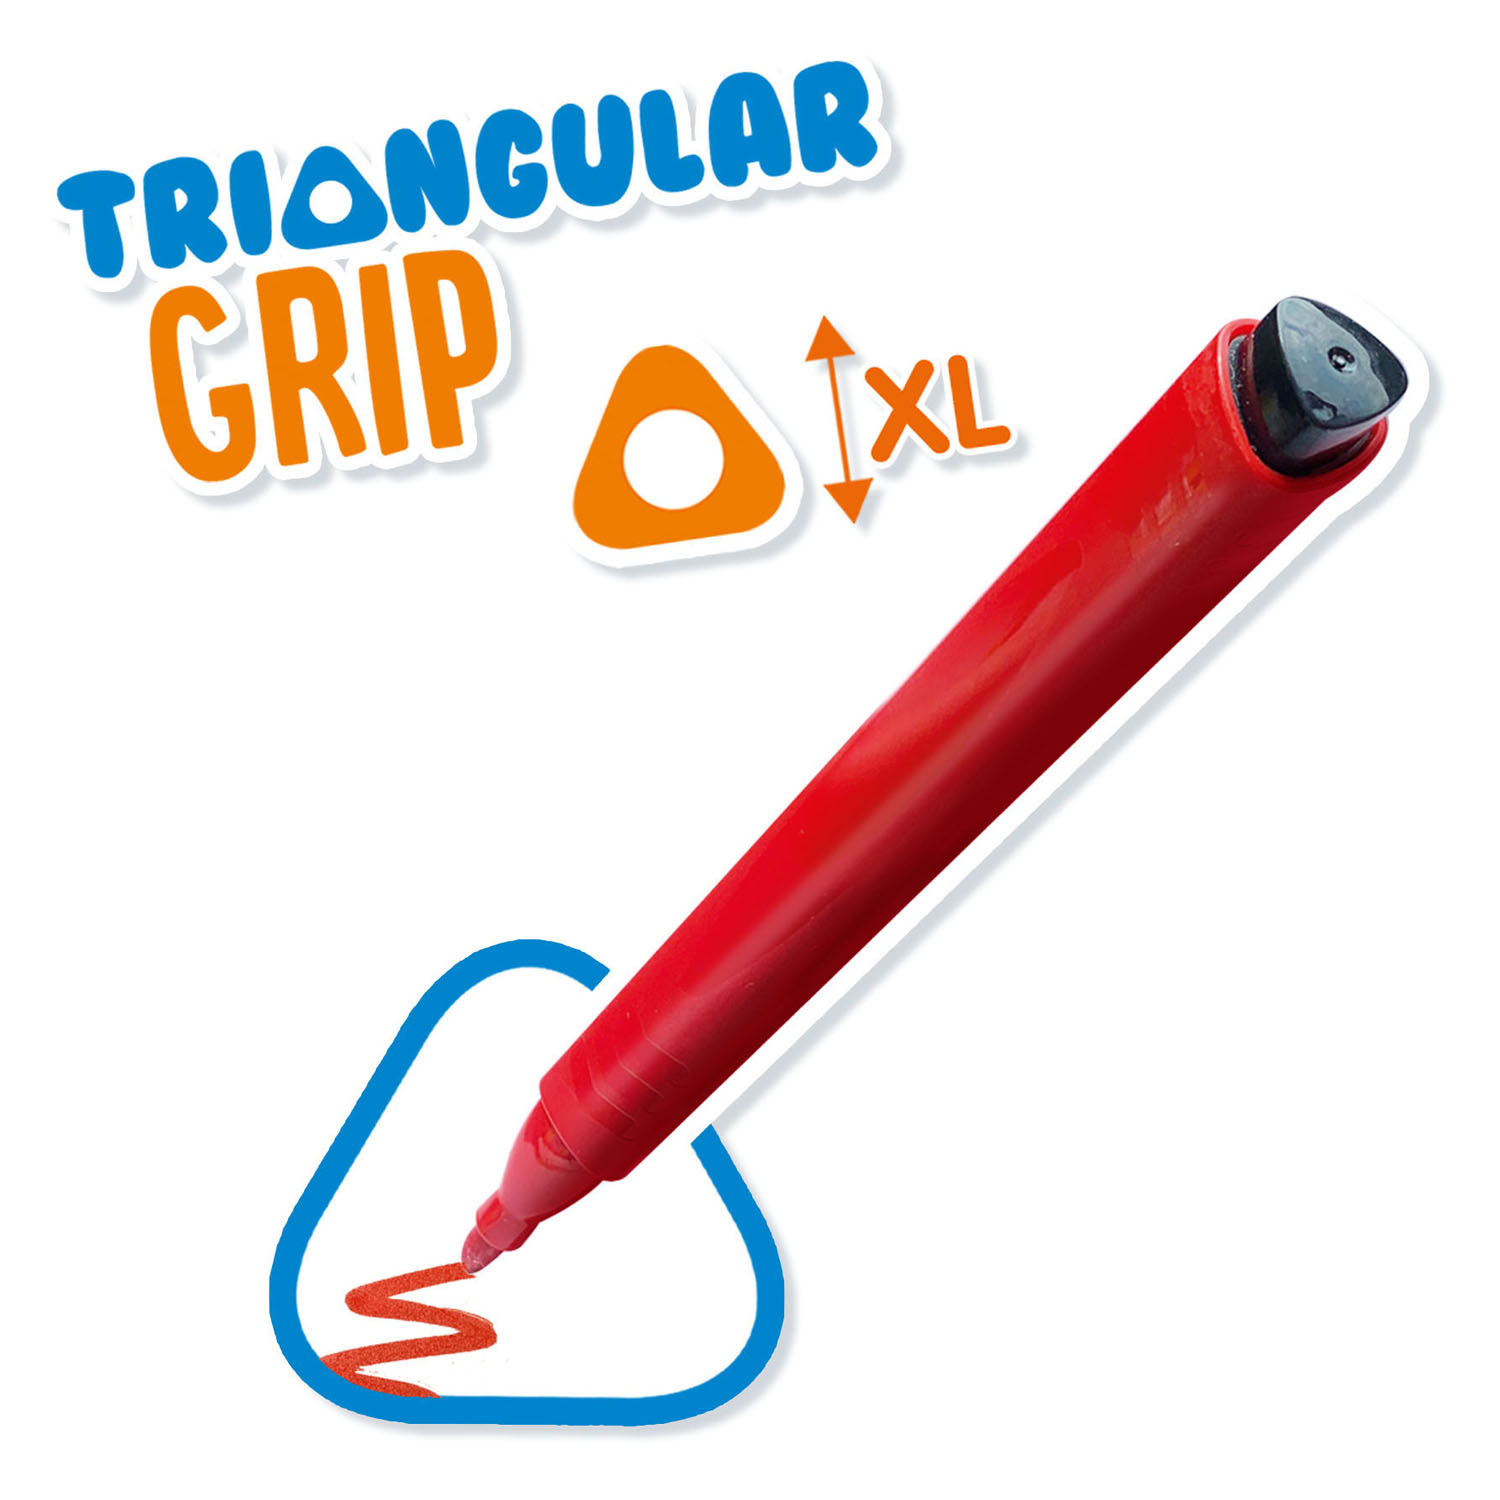 SES Triangle Grip Marker